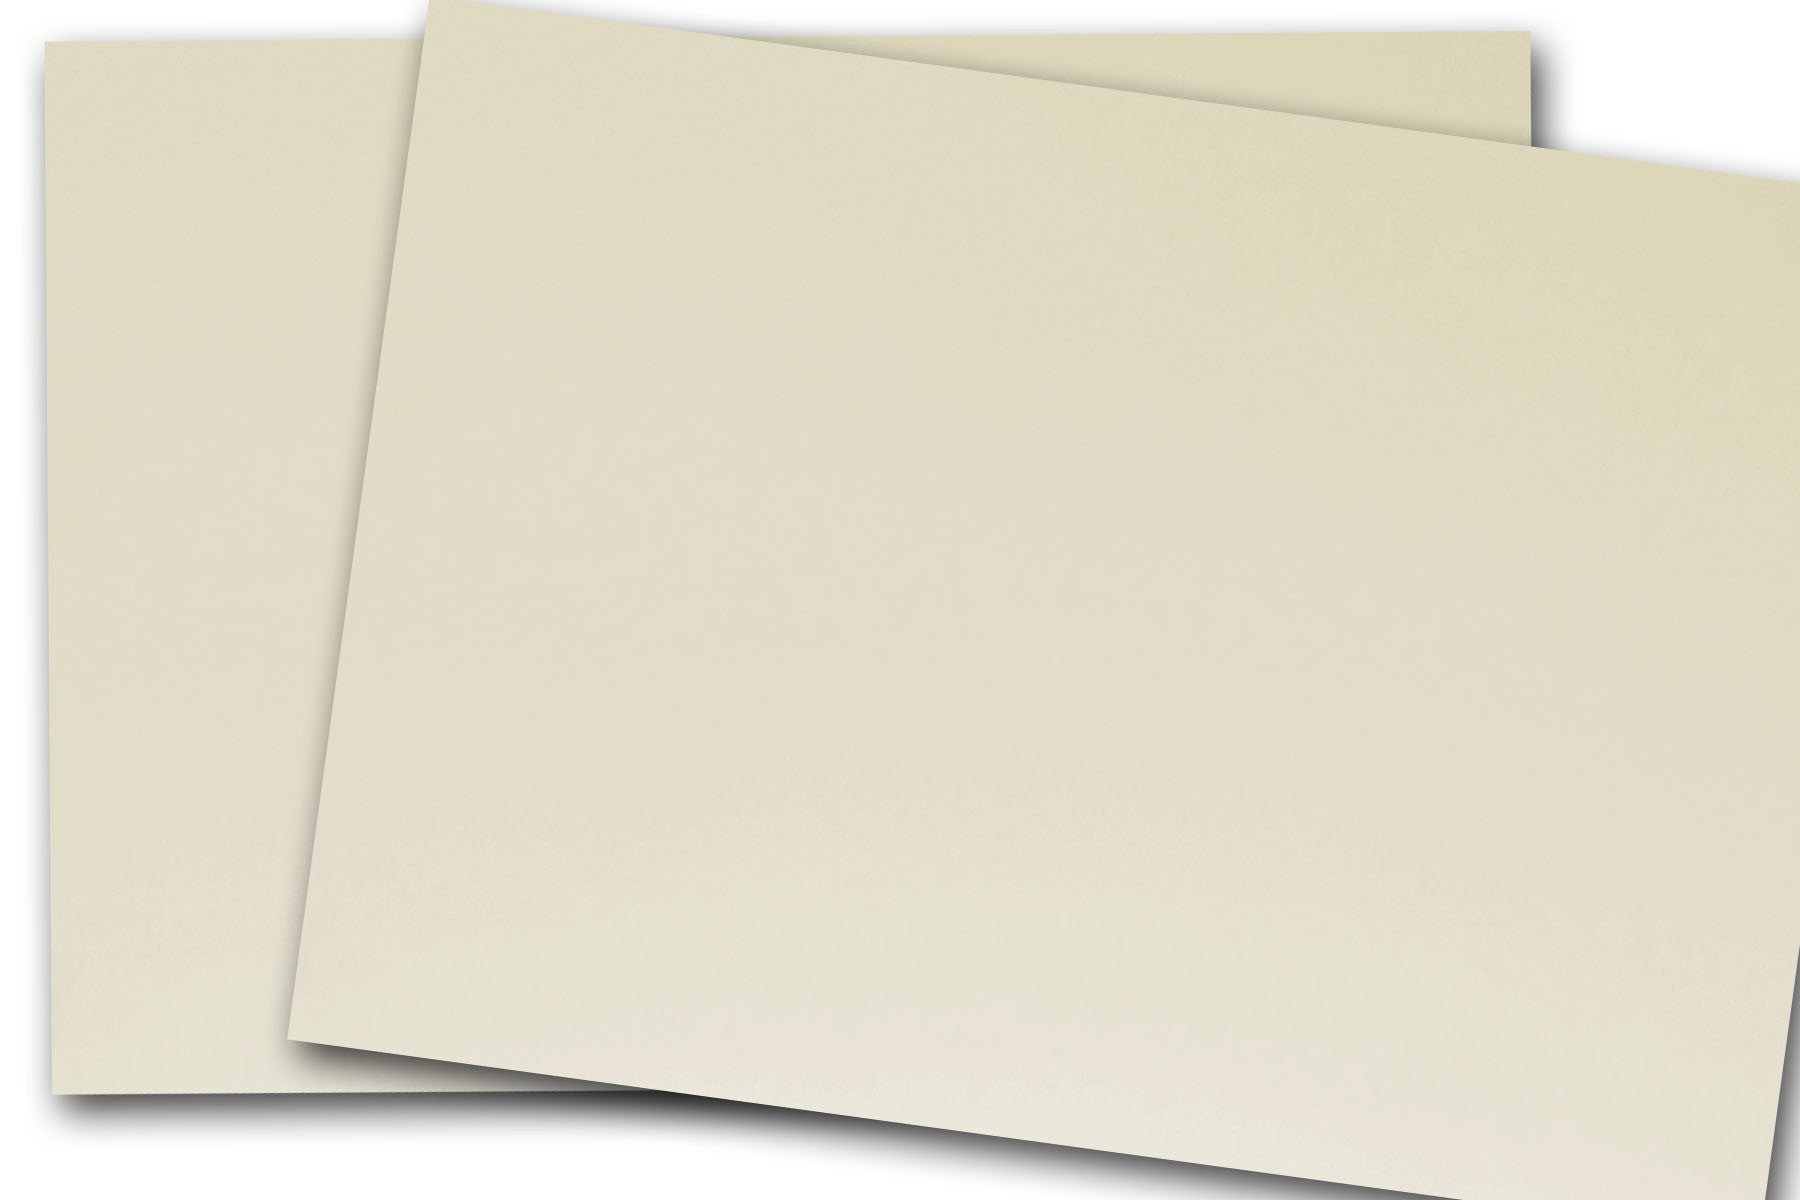 Classic CREST Smooth 130 lb DTC - 8.5x11 Cardstock